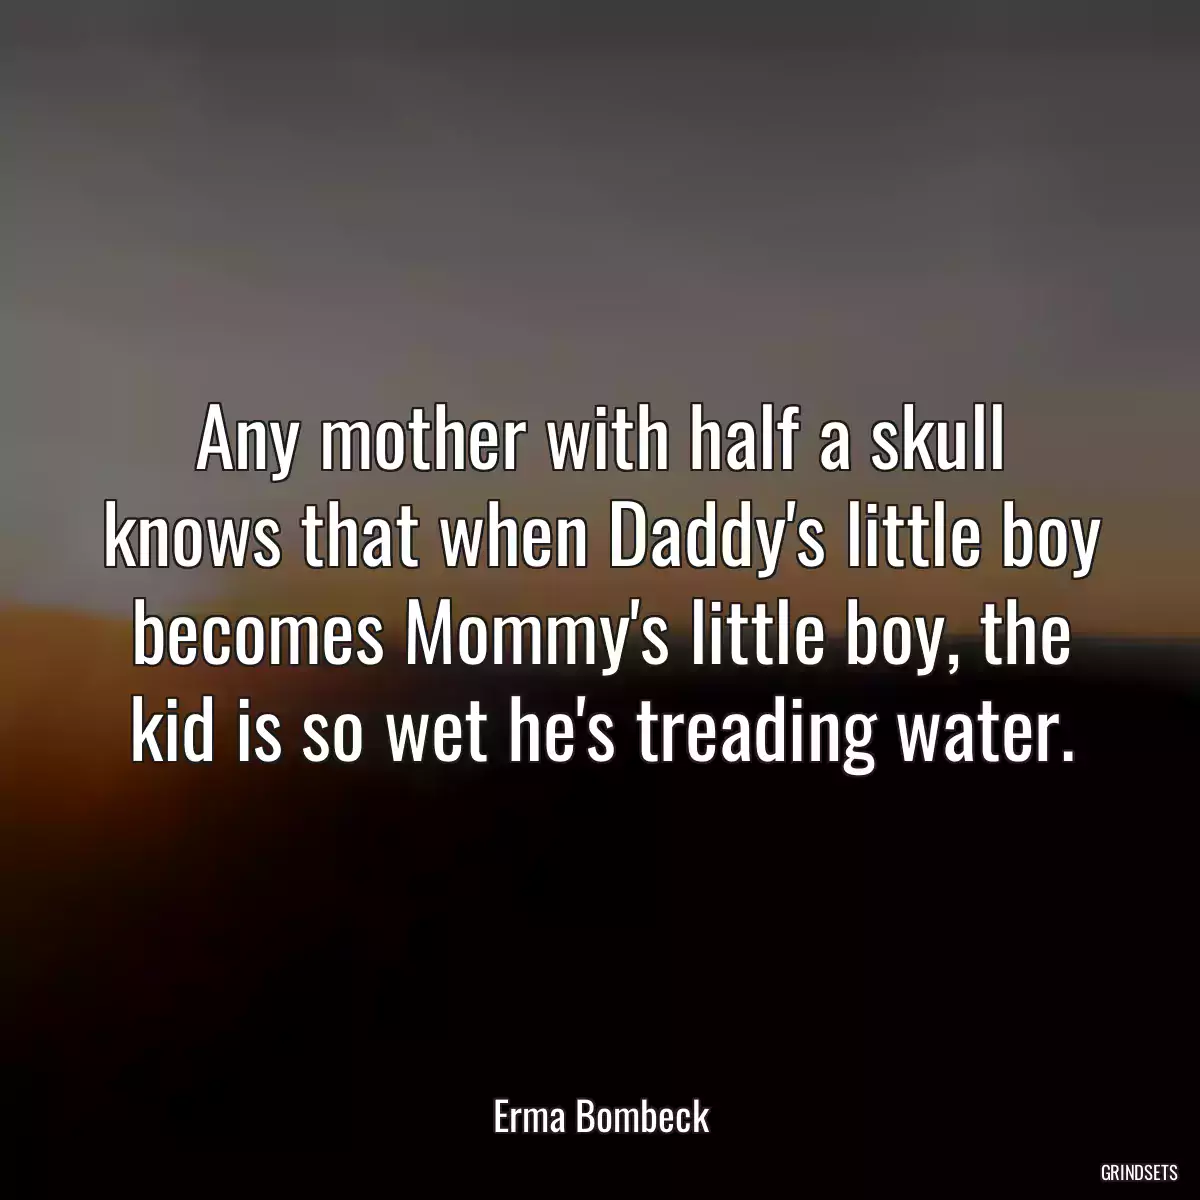 Any mother with half a skull knows that when Daddy\'s little boy becomes Mommy\'s little boy, the kid is so wet he\'s treading water.